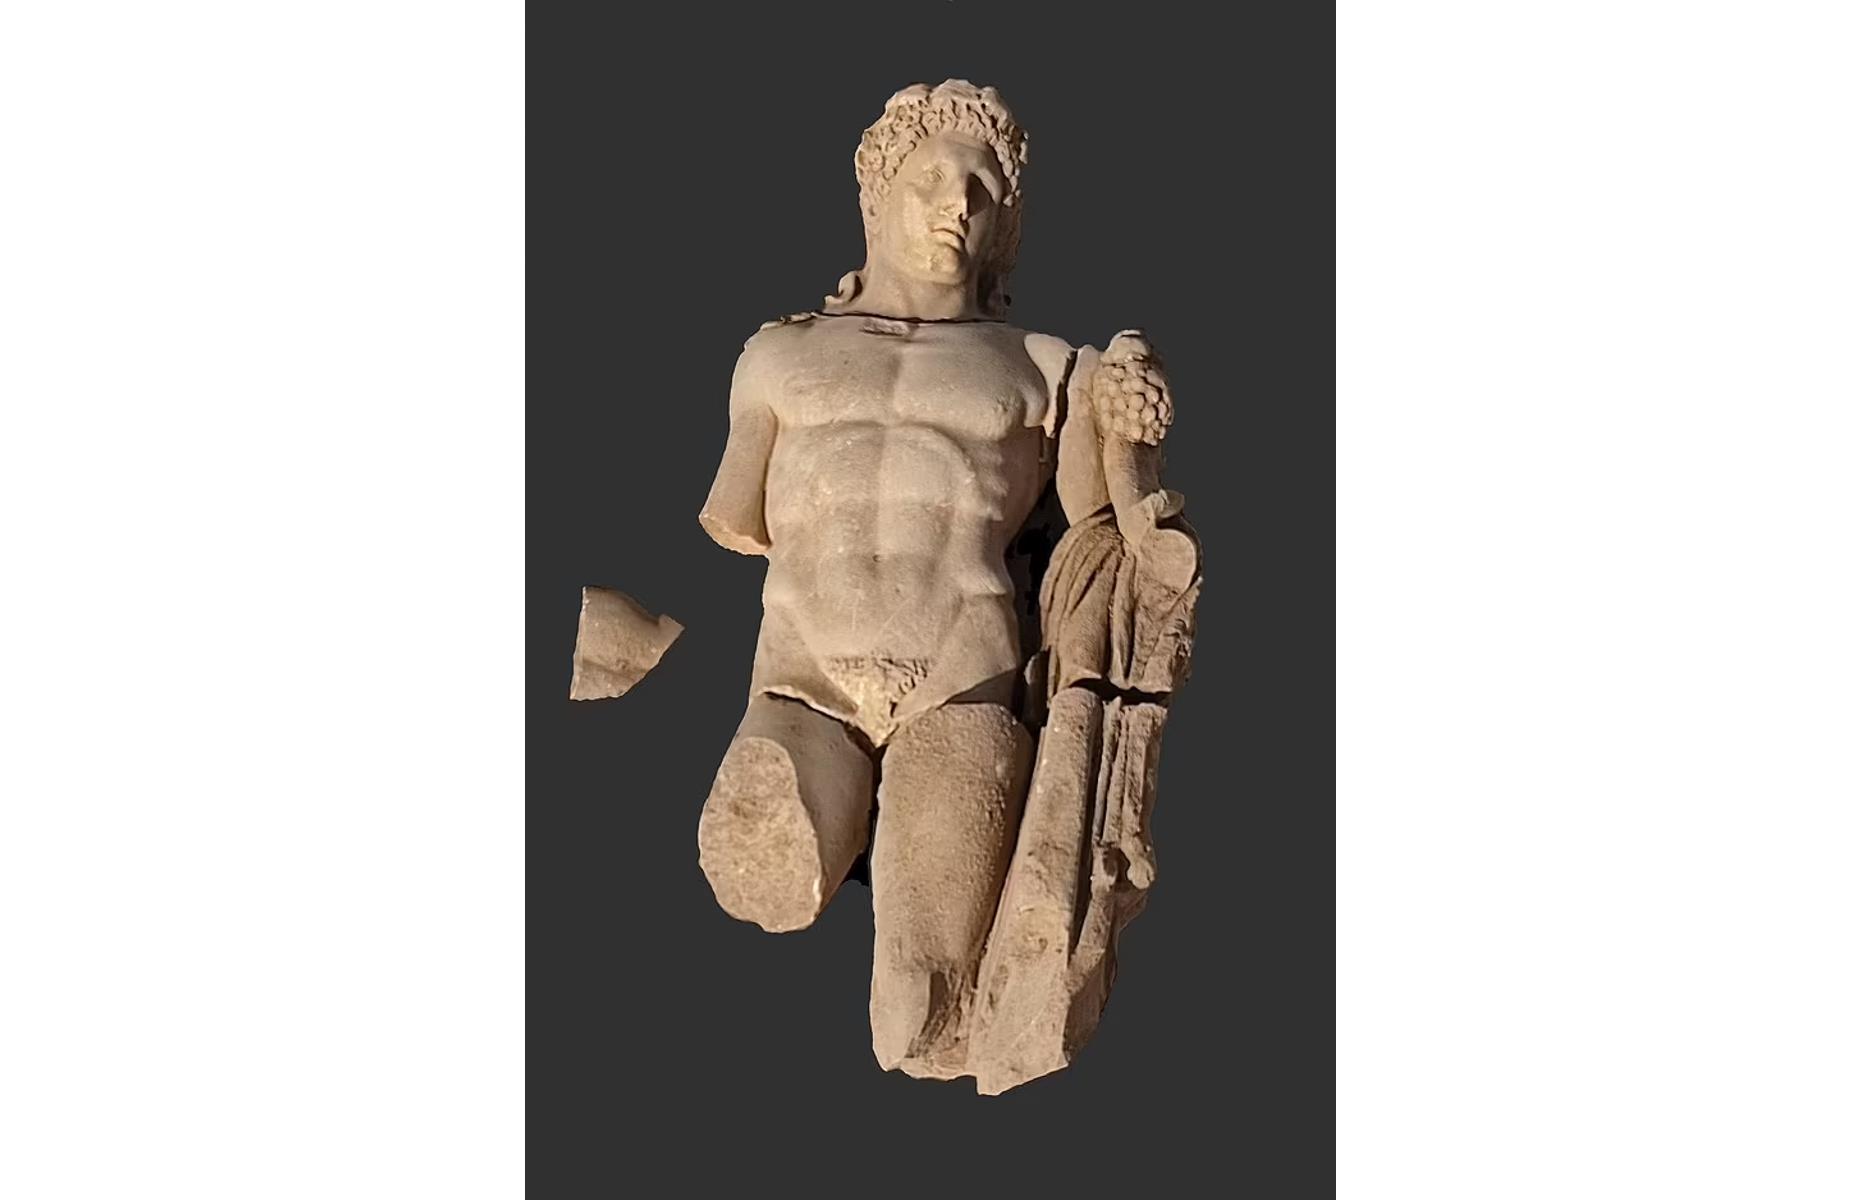 <p>While excavating the ancient and abandoned city of Philippi, a team from the Aristotle University <a href="https://edition.cnn.com/style/article/hercules-statue-philippi-greece-intl-scli-scn/index.html">discovered a well-preserved stature of the mythical hero Hercules</a>. The infamous figure from Greek and Roman myths was worshipped as a protector and a champion of the weak, often depicted holding a club and holding a lion skin cloak. The researchers believe that the almost 2,000-year-old statue was used to decorate a building, which dates back to the 8th or 9th century.</p>  <p><strong><a href="https://www.loveexploring.com/galleries/88794/what-the-seven-wonders-of-the-ancient-world-would-look-like-today">Find out what the Seven Wonders of the Ancient World would look like today</a></strong></p>